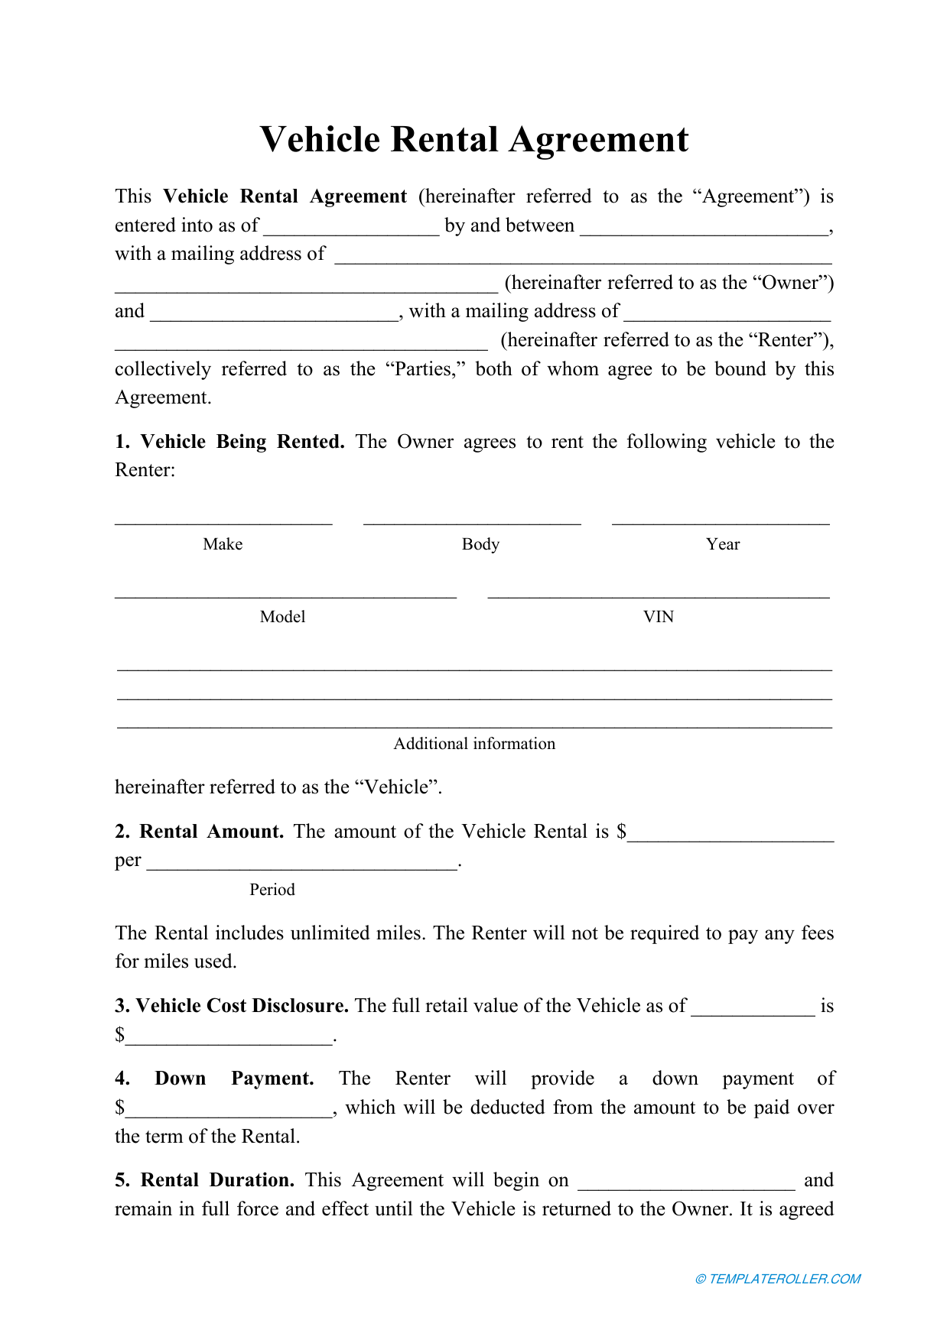 Vehicle Rental Agreement Template Fill Out Sign Online And Download 